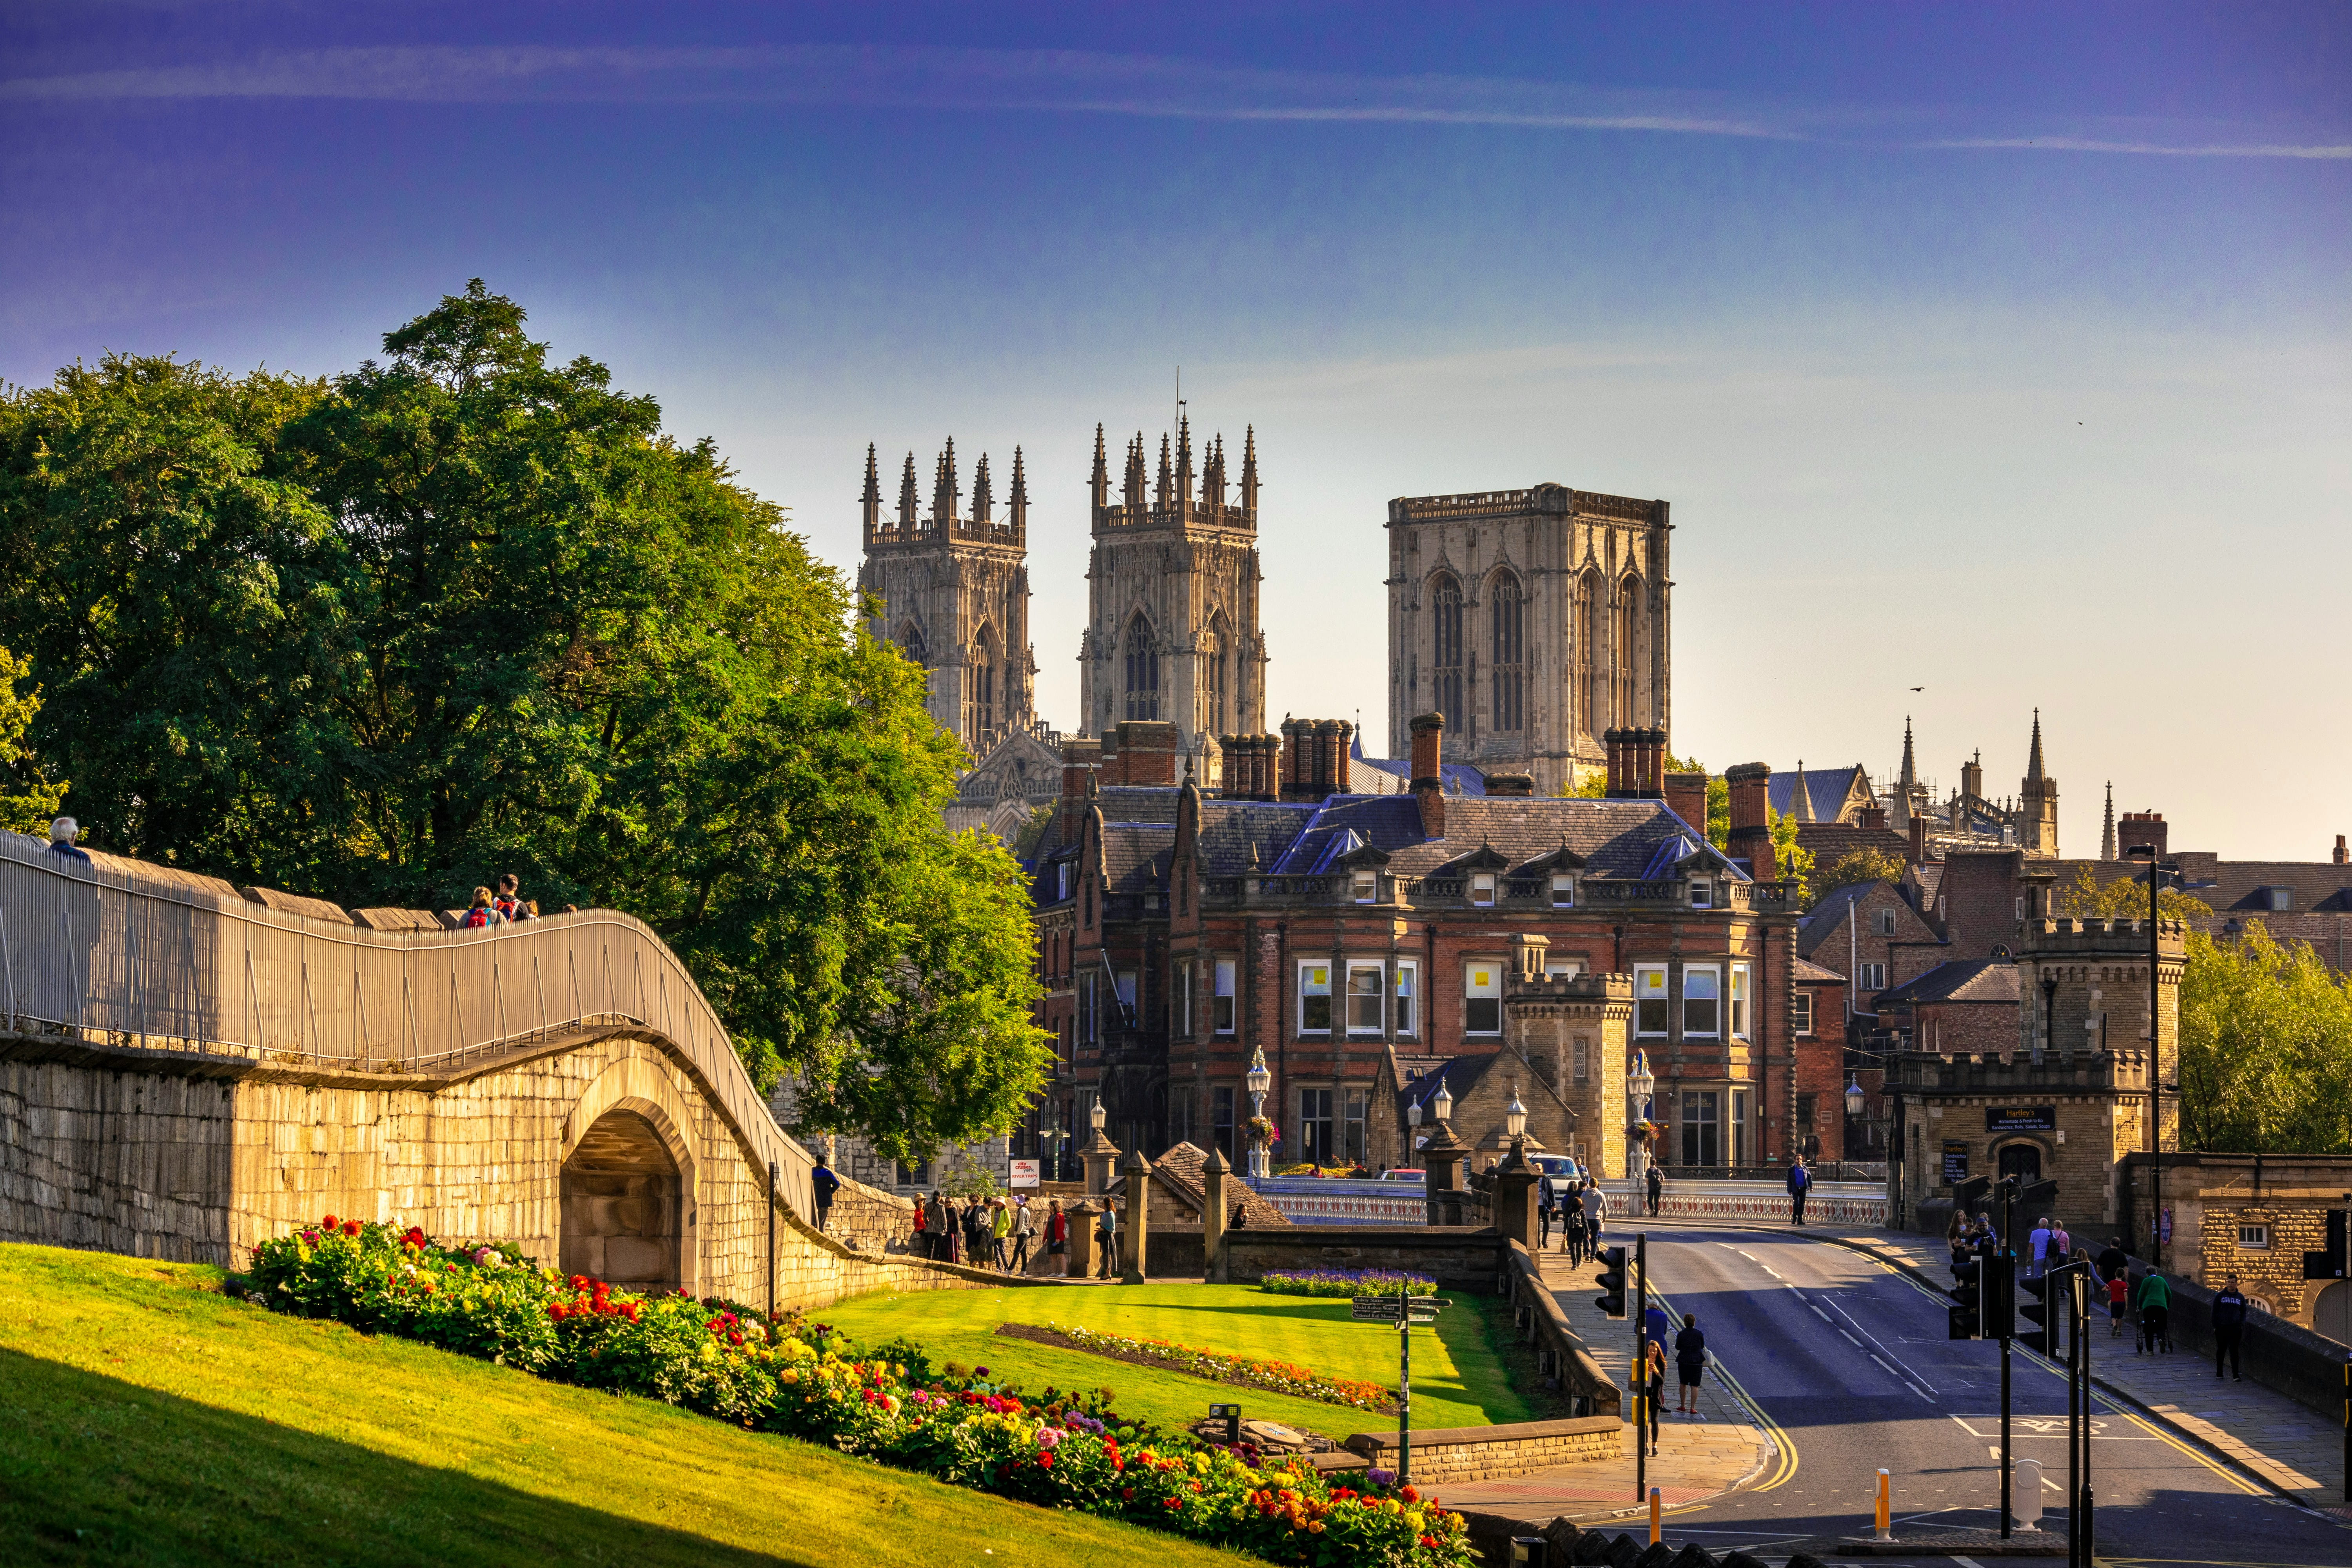 A view of York with the York Minster in the background